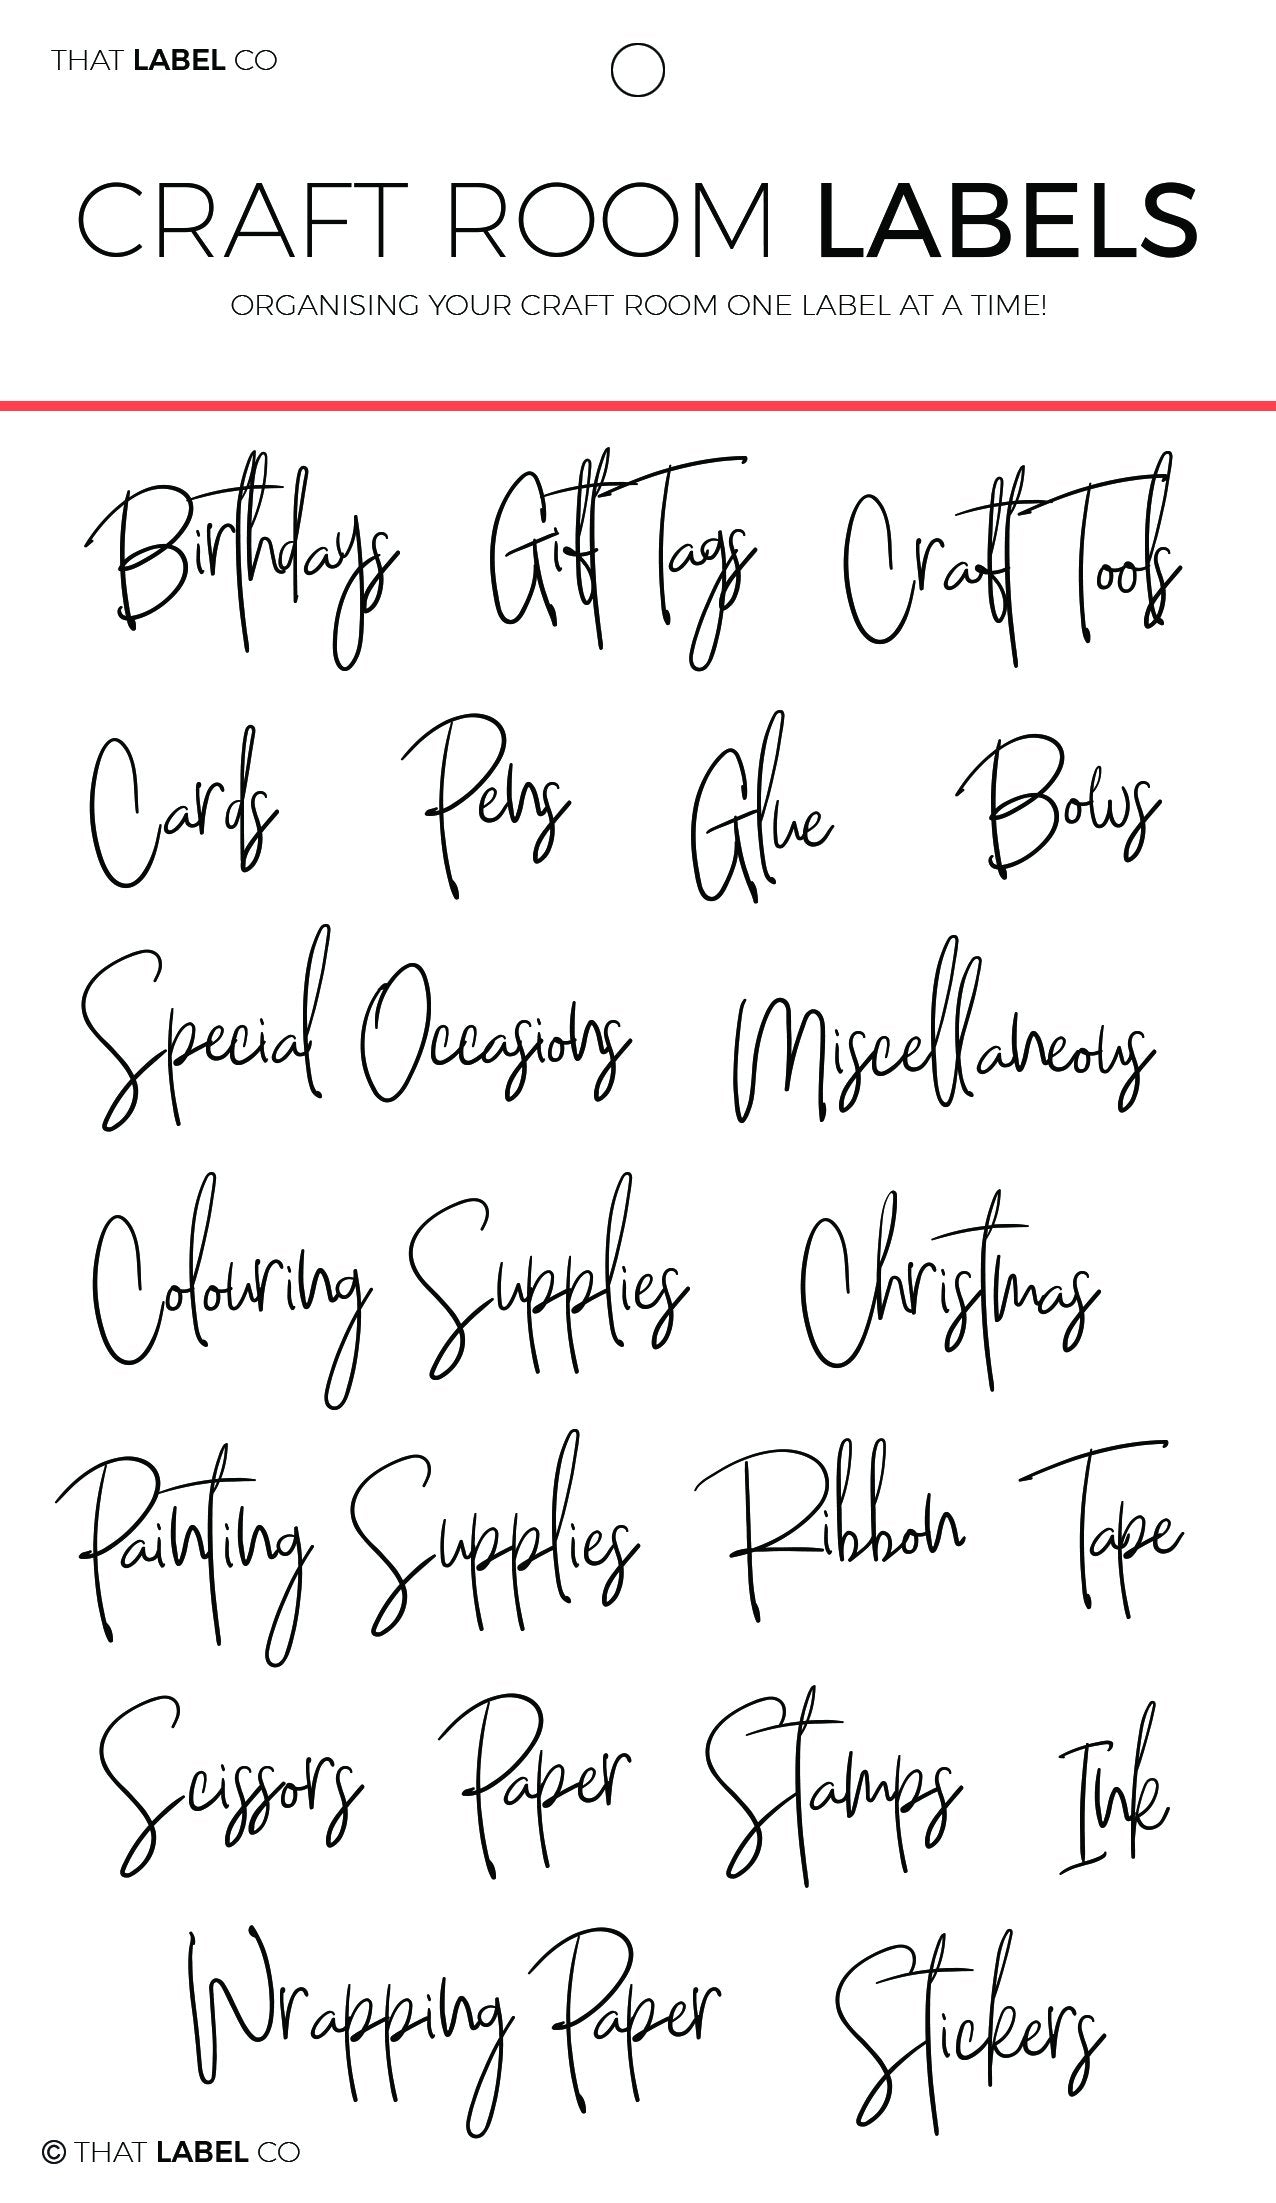 Craft Room Organisational Label Packs by That Label Co